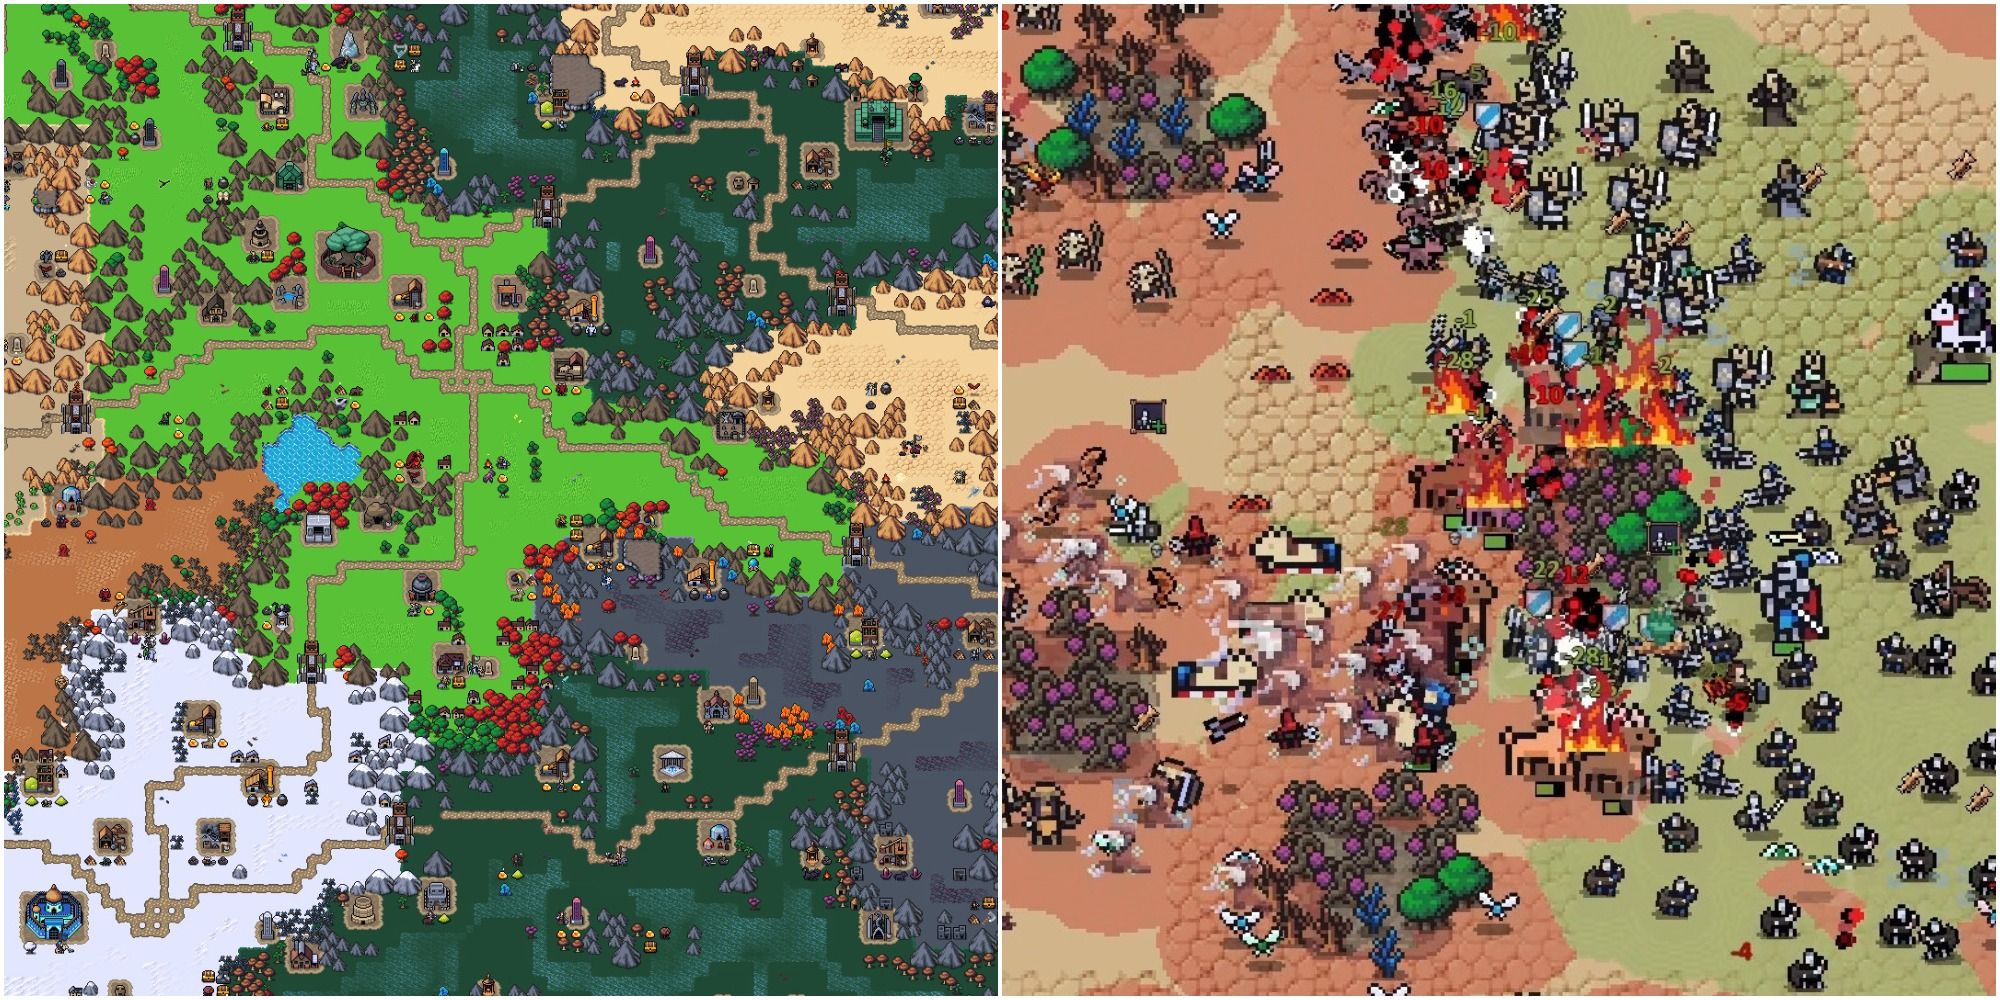 Hero's Hour - collage of world map and a large-scale combat